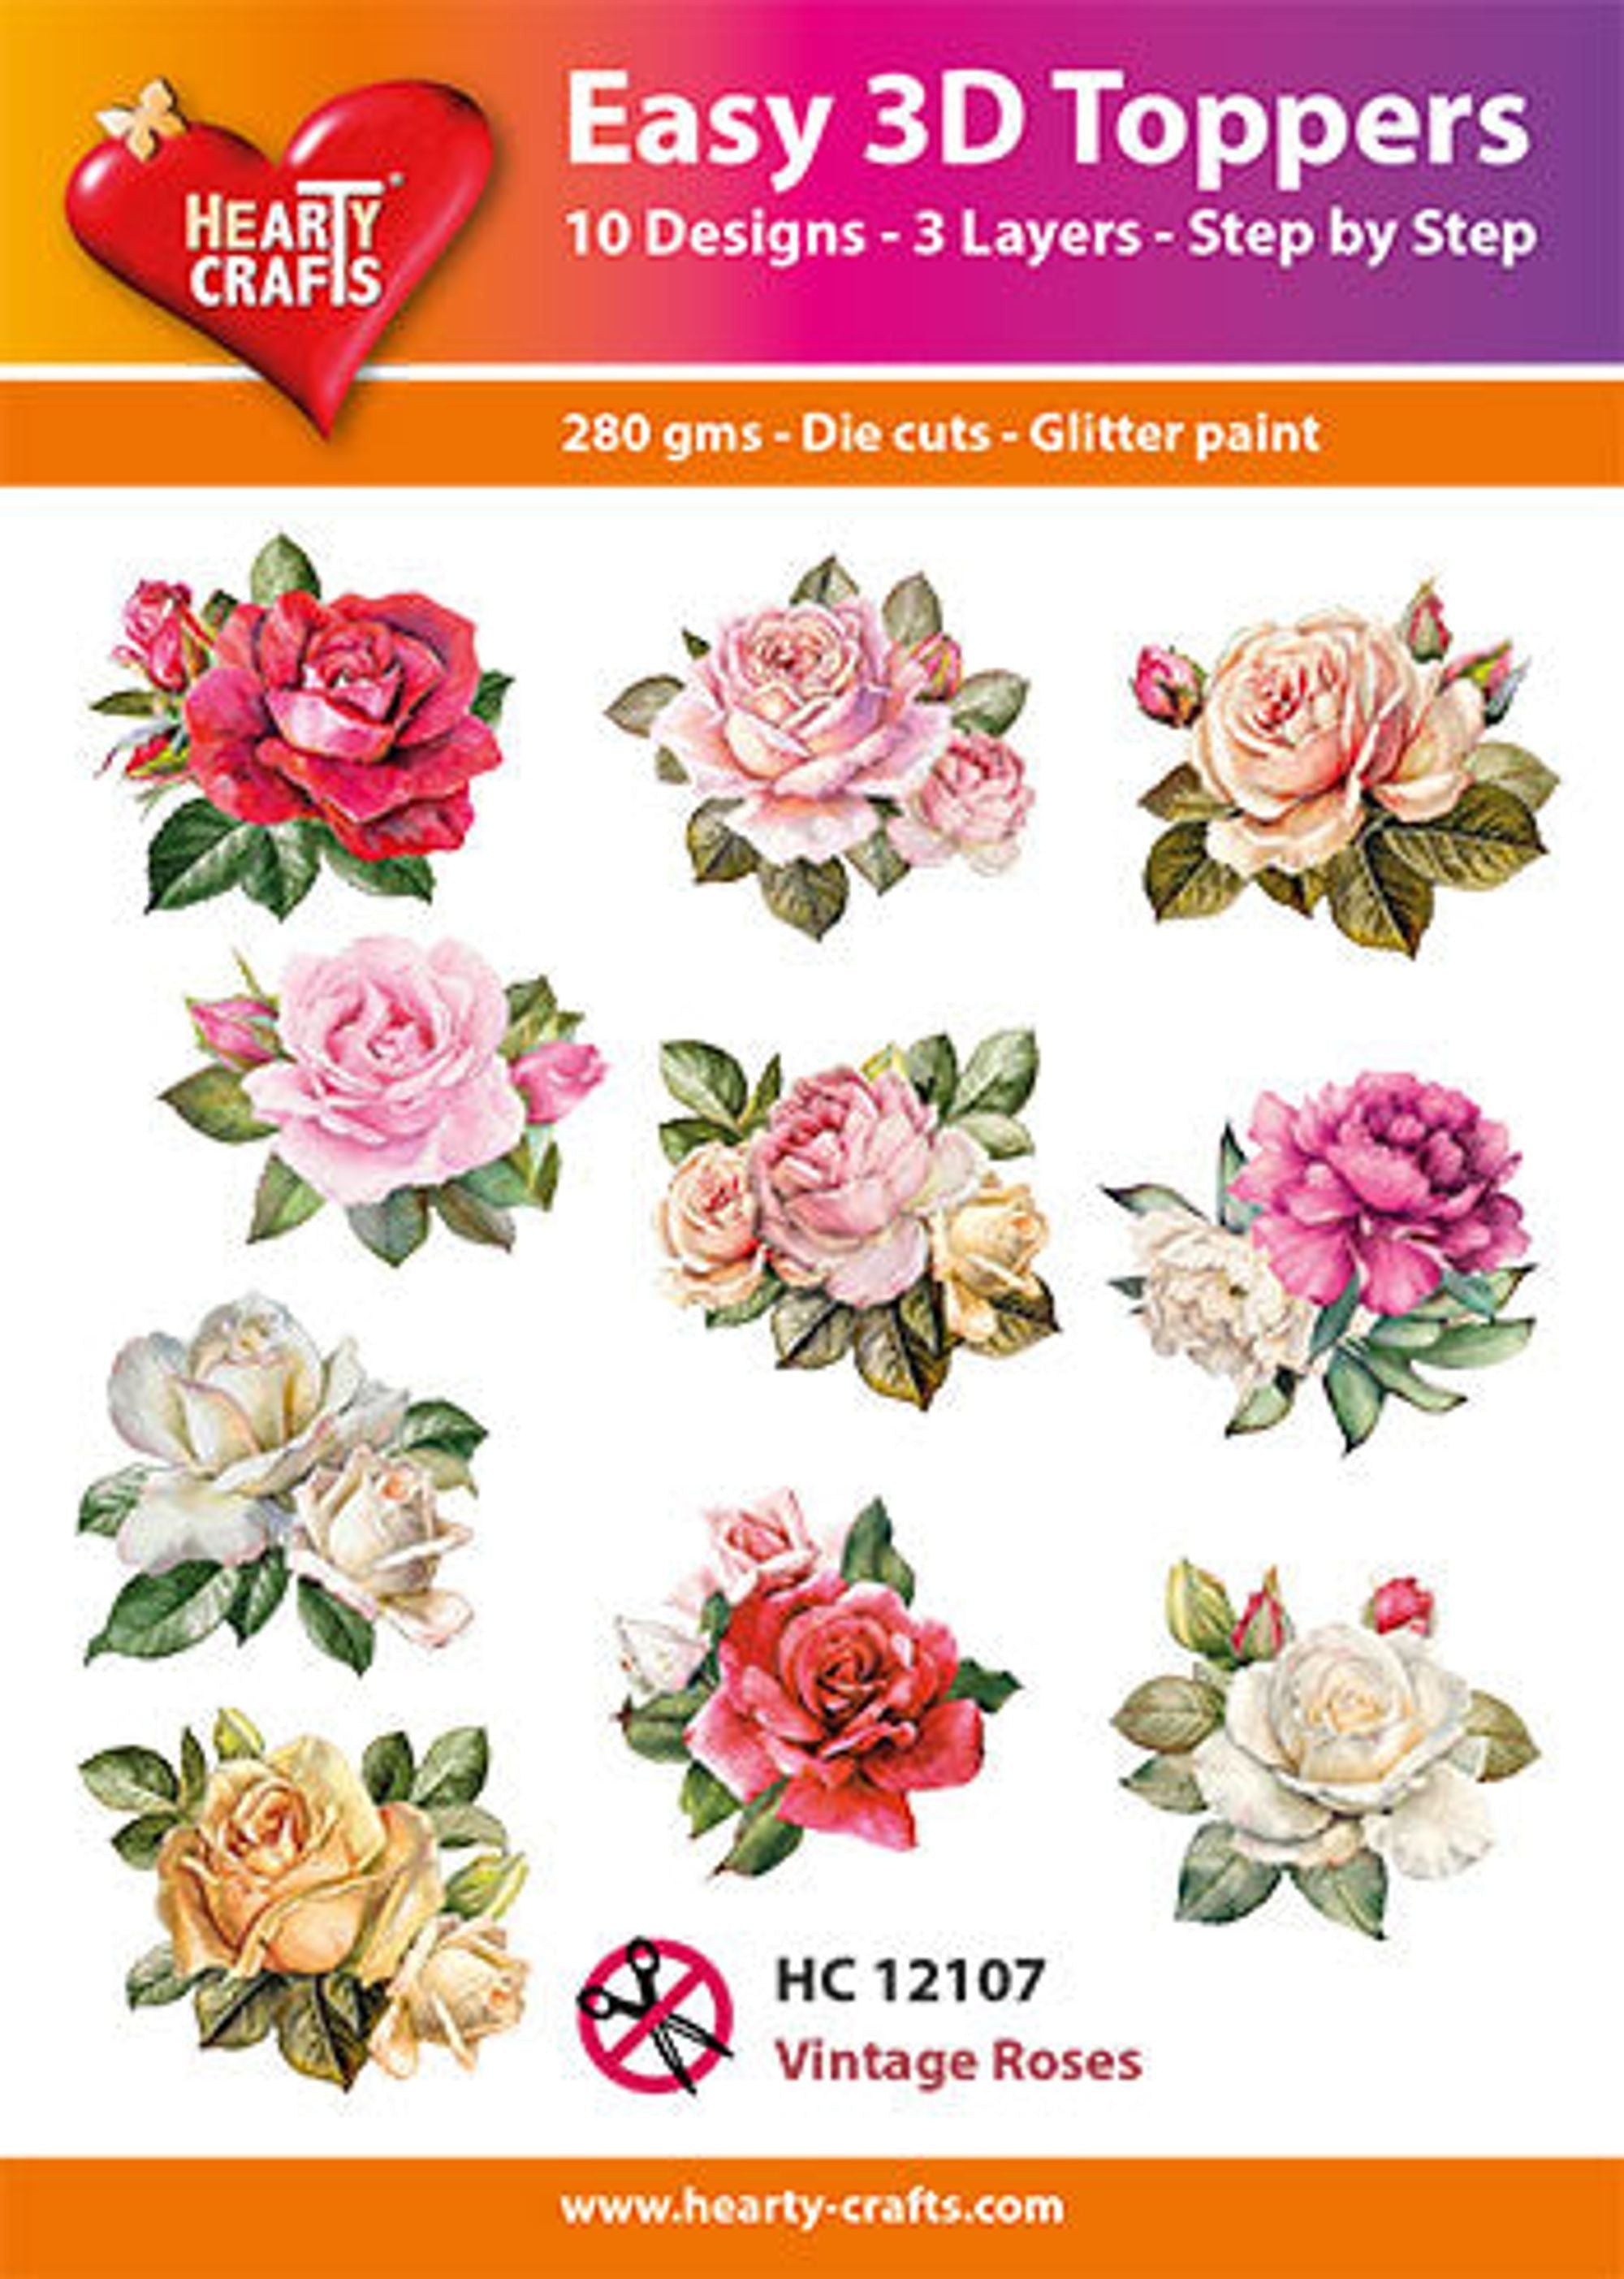 Easy 3D Toppers - Vintage Roses